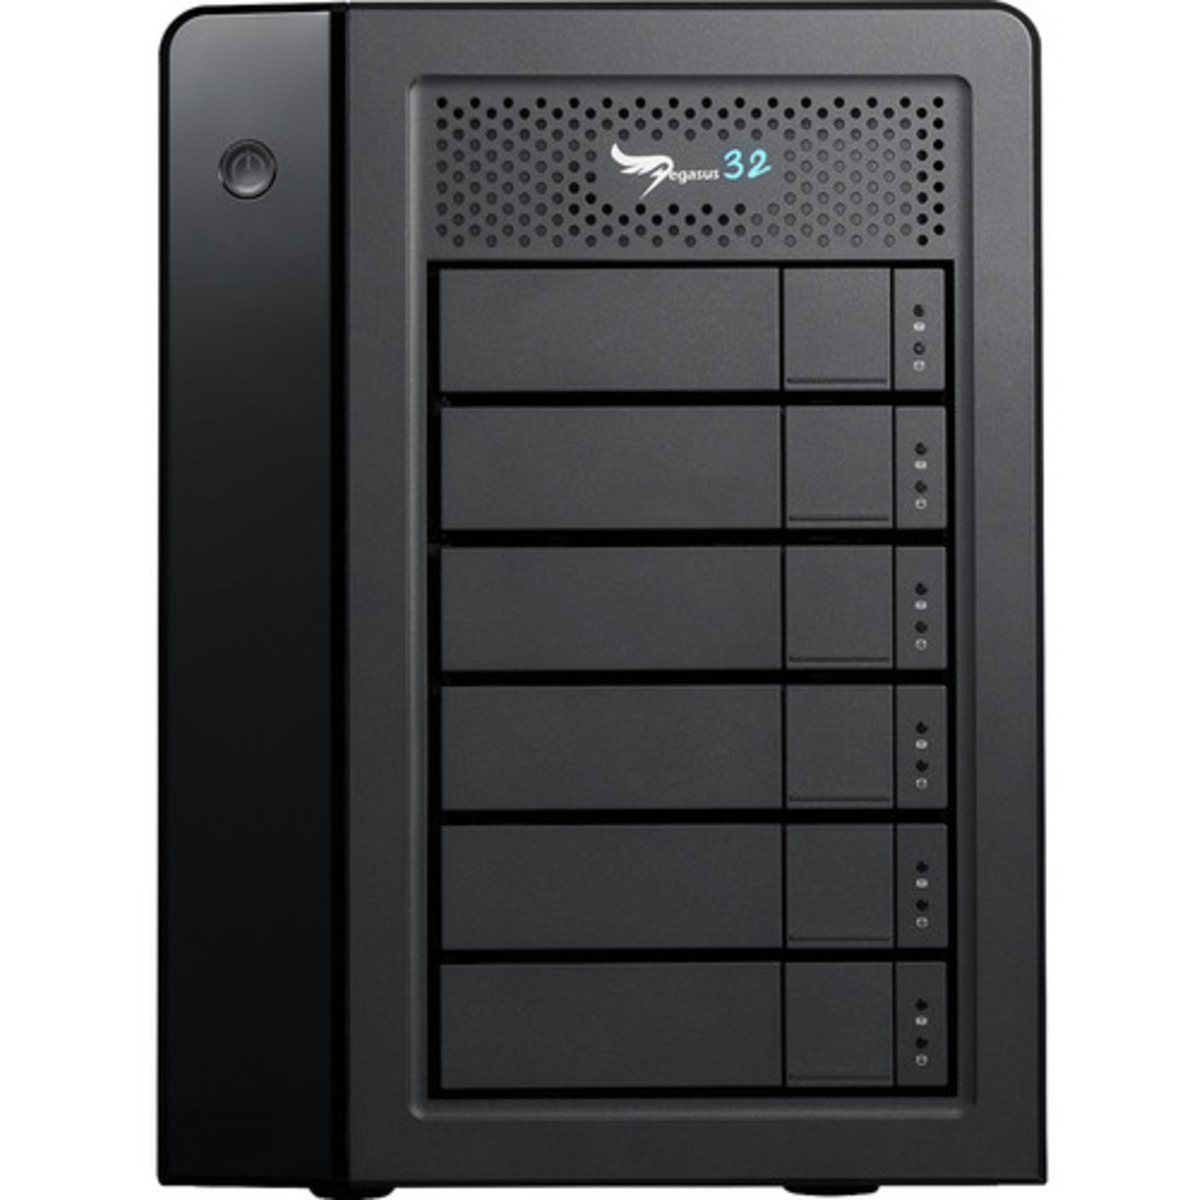 buy Promise Technology Pegasus32 R6 Thunderbolt 3 132tb Desktop DAS - Direct Attached Storage Device 6x22000gb Western Digital Ultrastar HC570 WUH722222ALE6L4 3.5 7200rpm SATA 6Gb/s HDD ENTERPRISE Class Drives Installed - Burn-In Tested - nas headquarters buy network attached storage server device das new raid-5 free shipping simply usa Pegasus32 R6 Thunderbolt 3